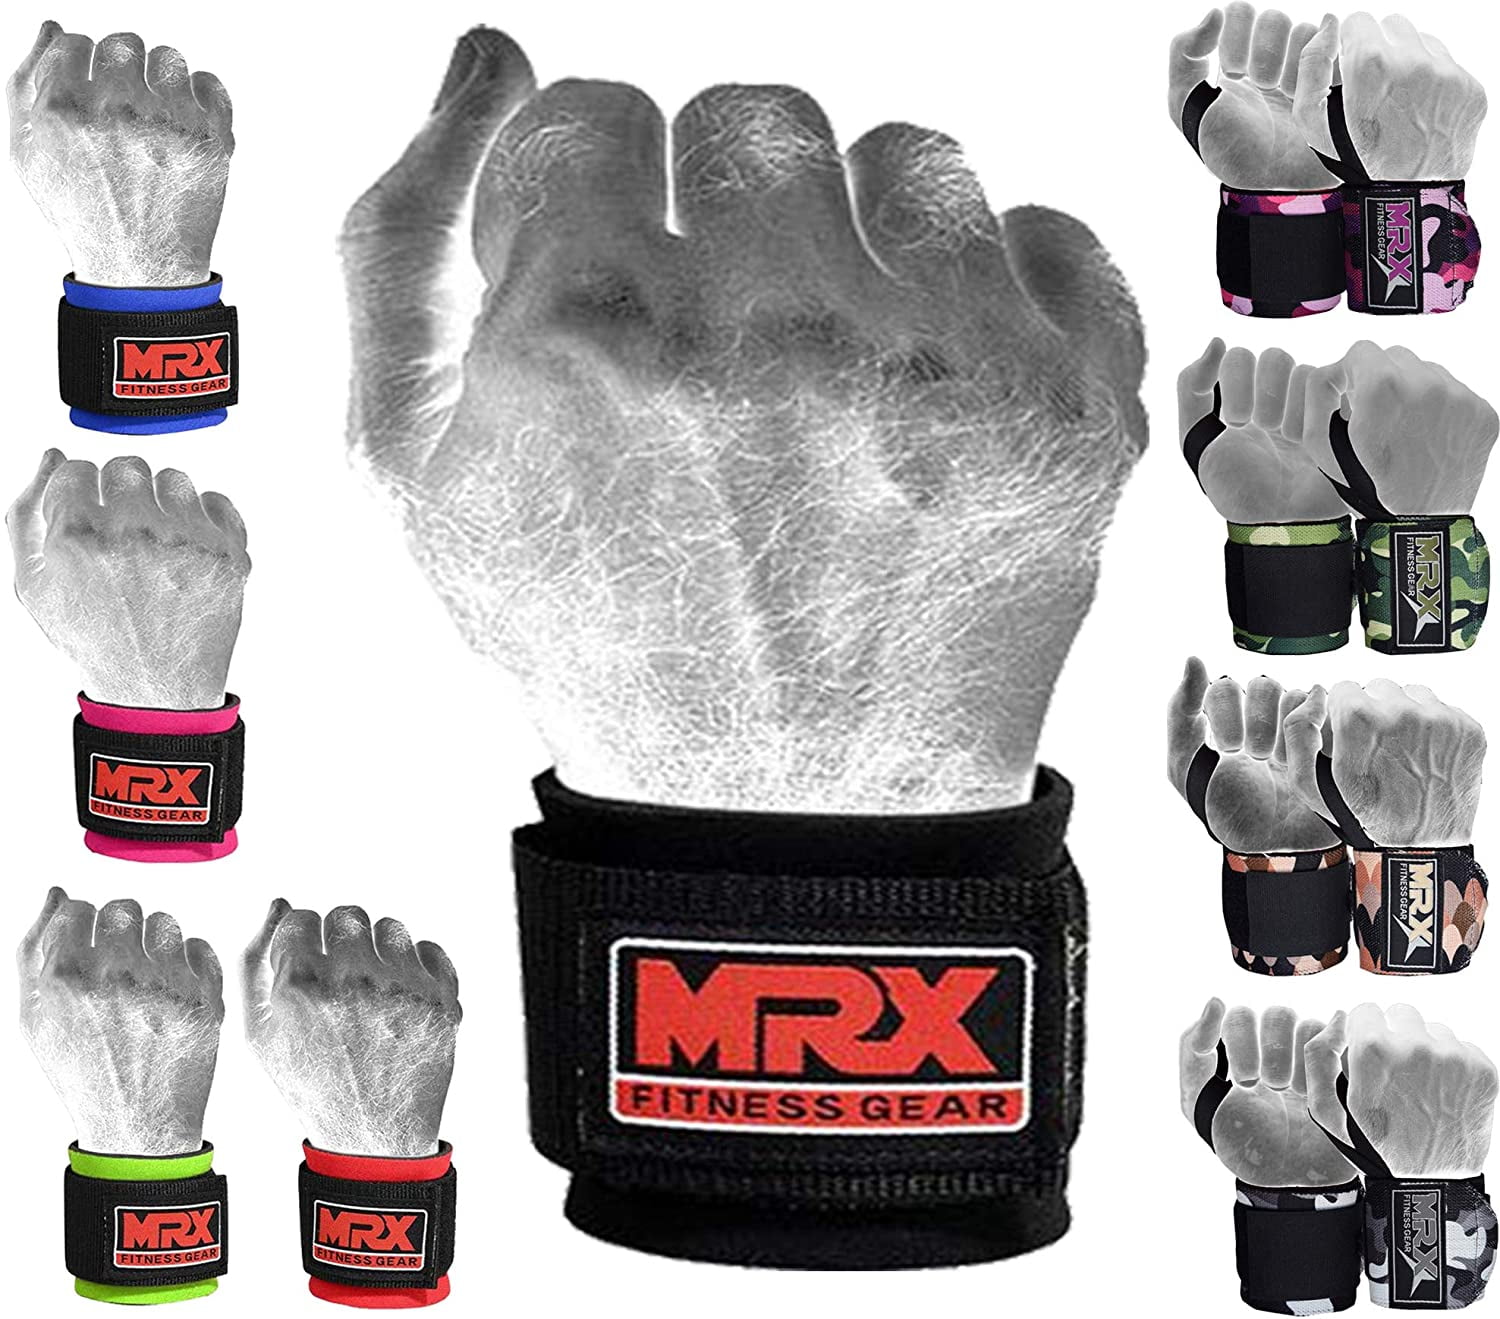 Wrist Wraps Gym Weight Lifting Fitness Training Bandages Crossfit Powerlifting 